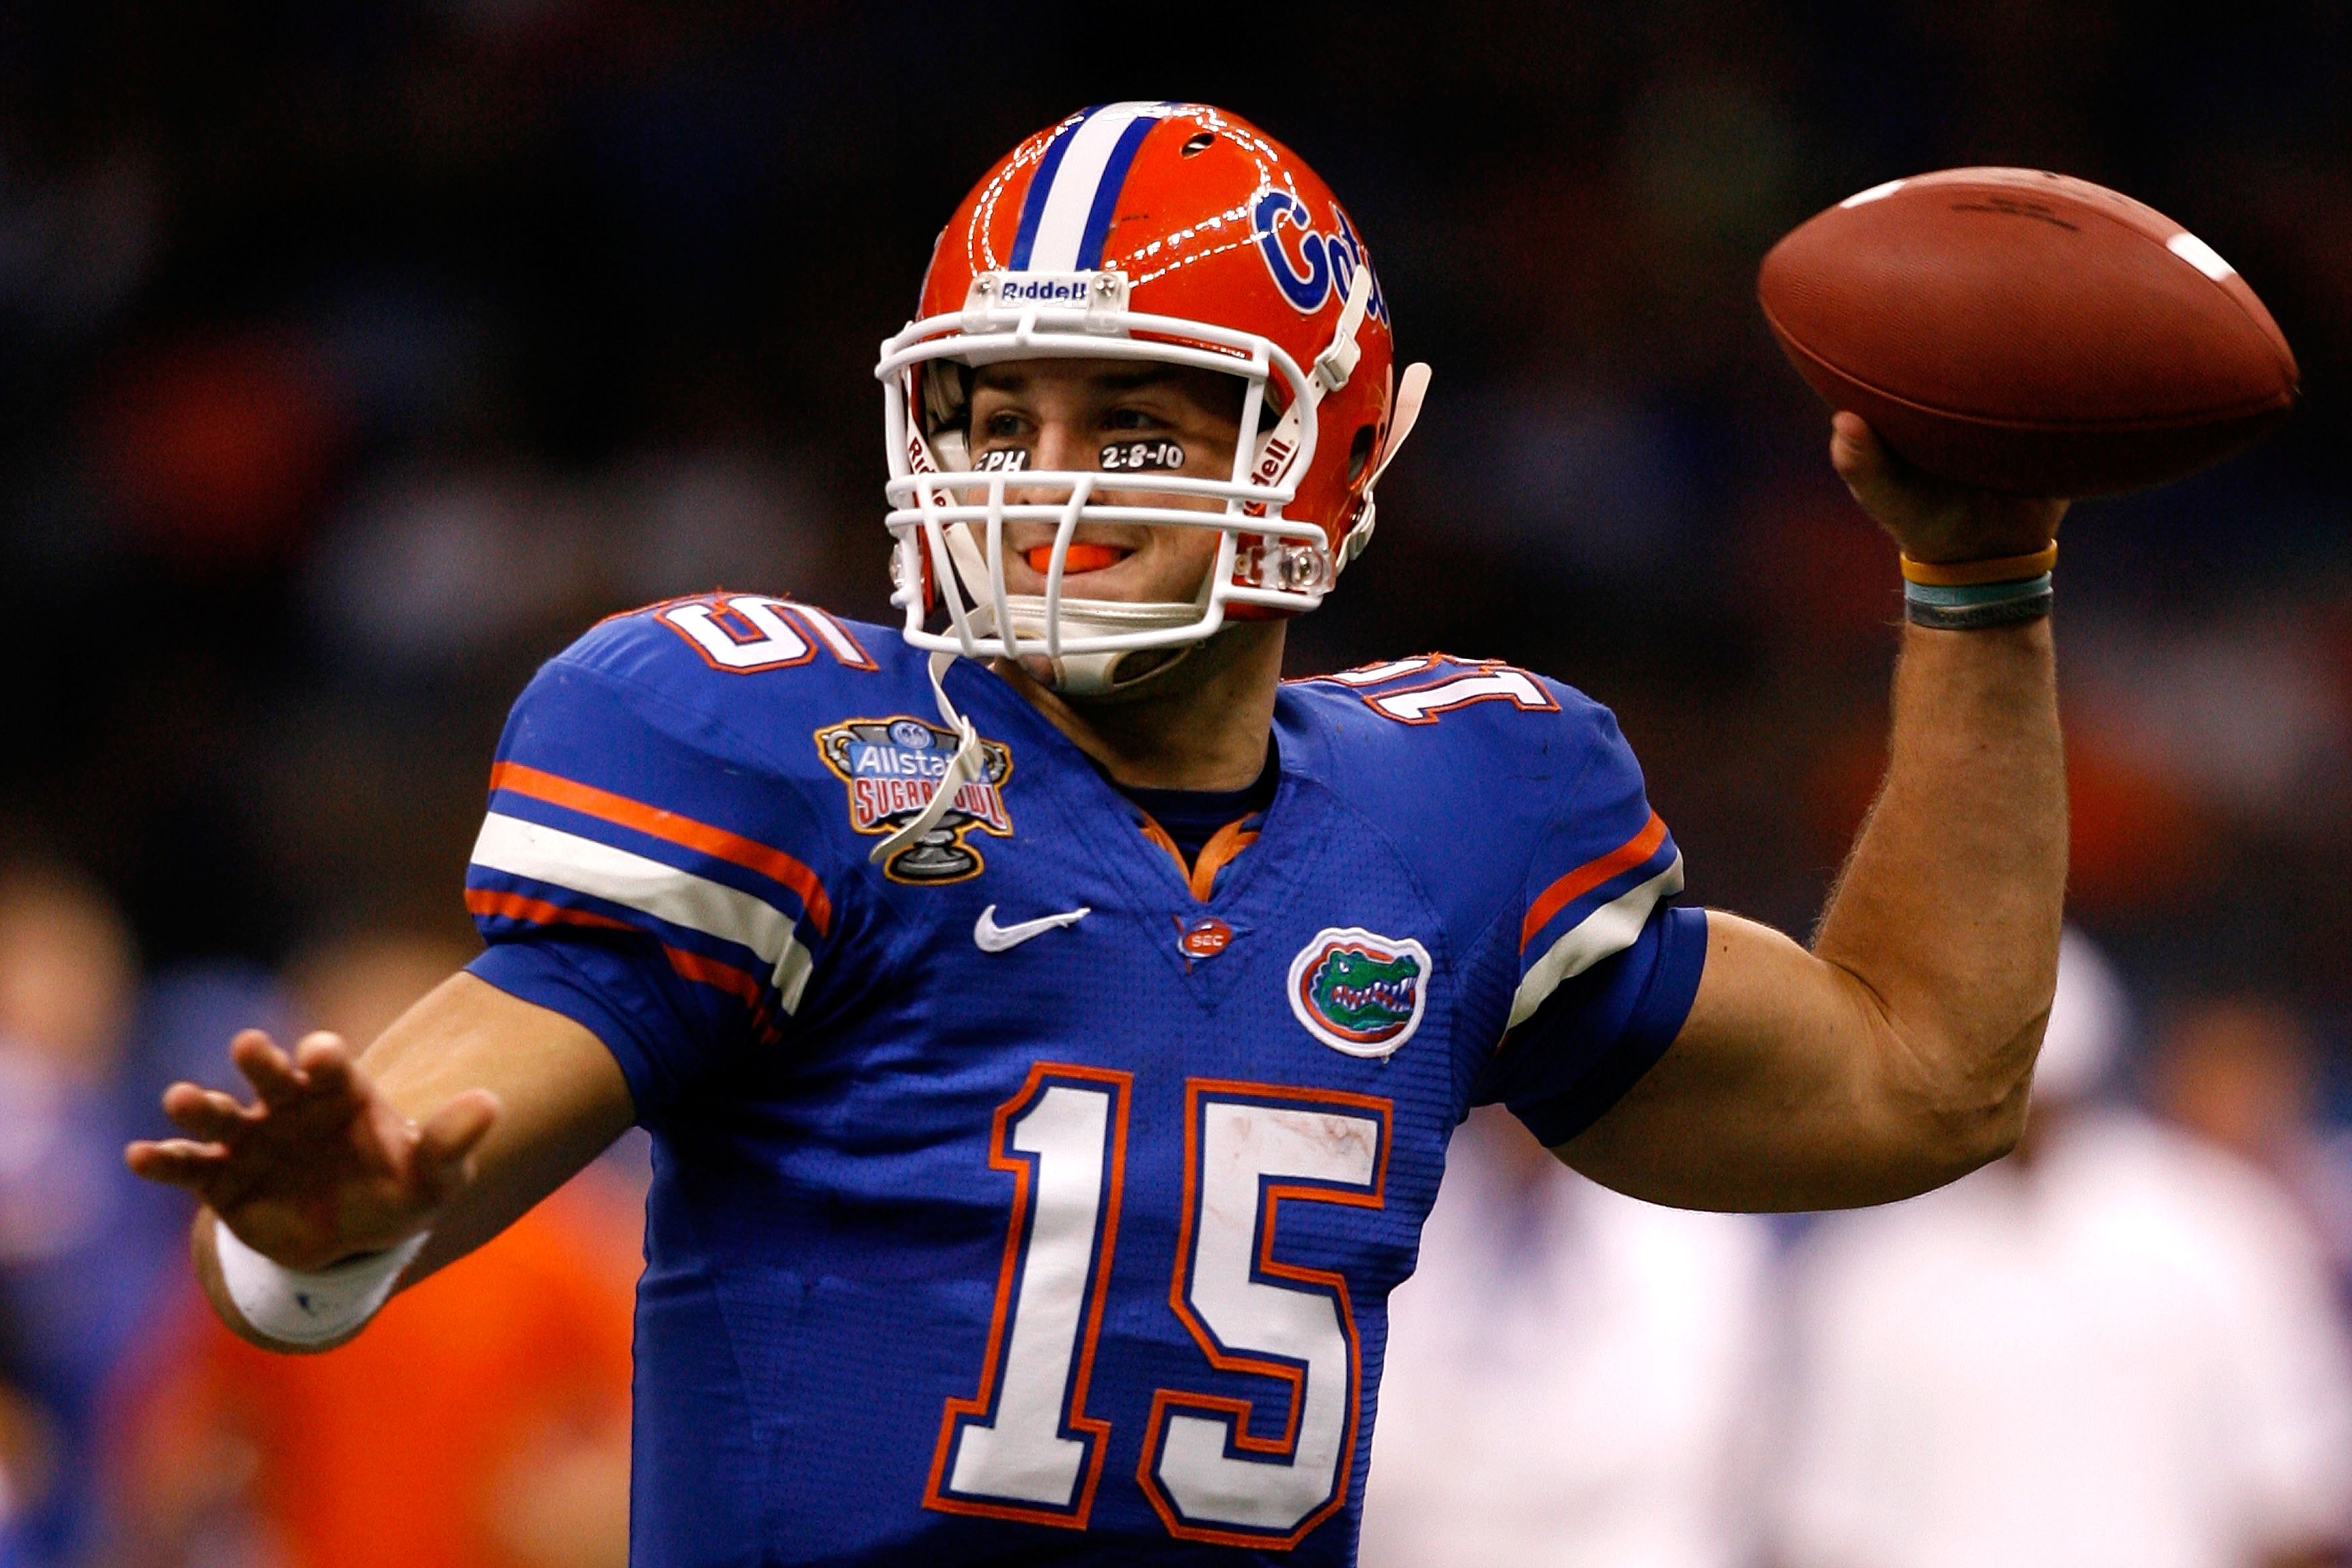 NEW ORLEANS - JANUARY 01:  Quarterback Tim Tebow #15 of the Florida Gators throws a pass against the Cincinnati Bearcats during the Allstate Sugar Bowl at the Louisana Superdome on January 1, 2010 in New Orleans, Louisiana.  (Photo by Matthew Stockman/Get